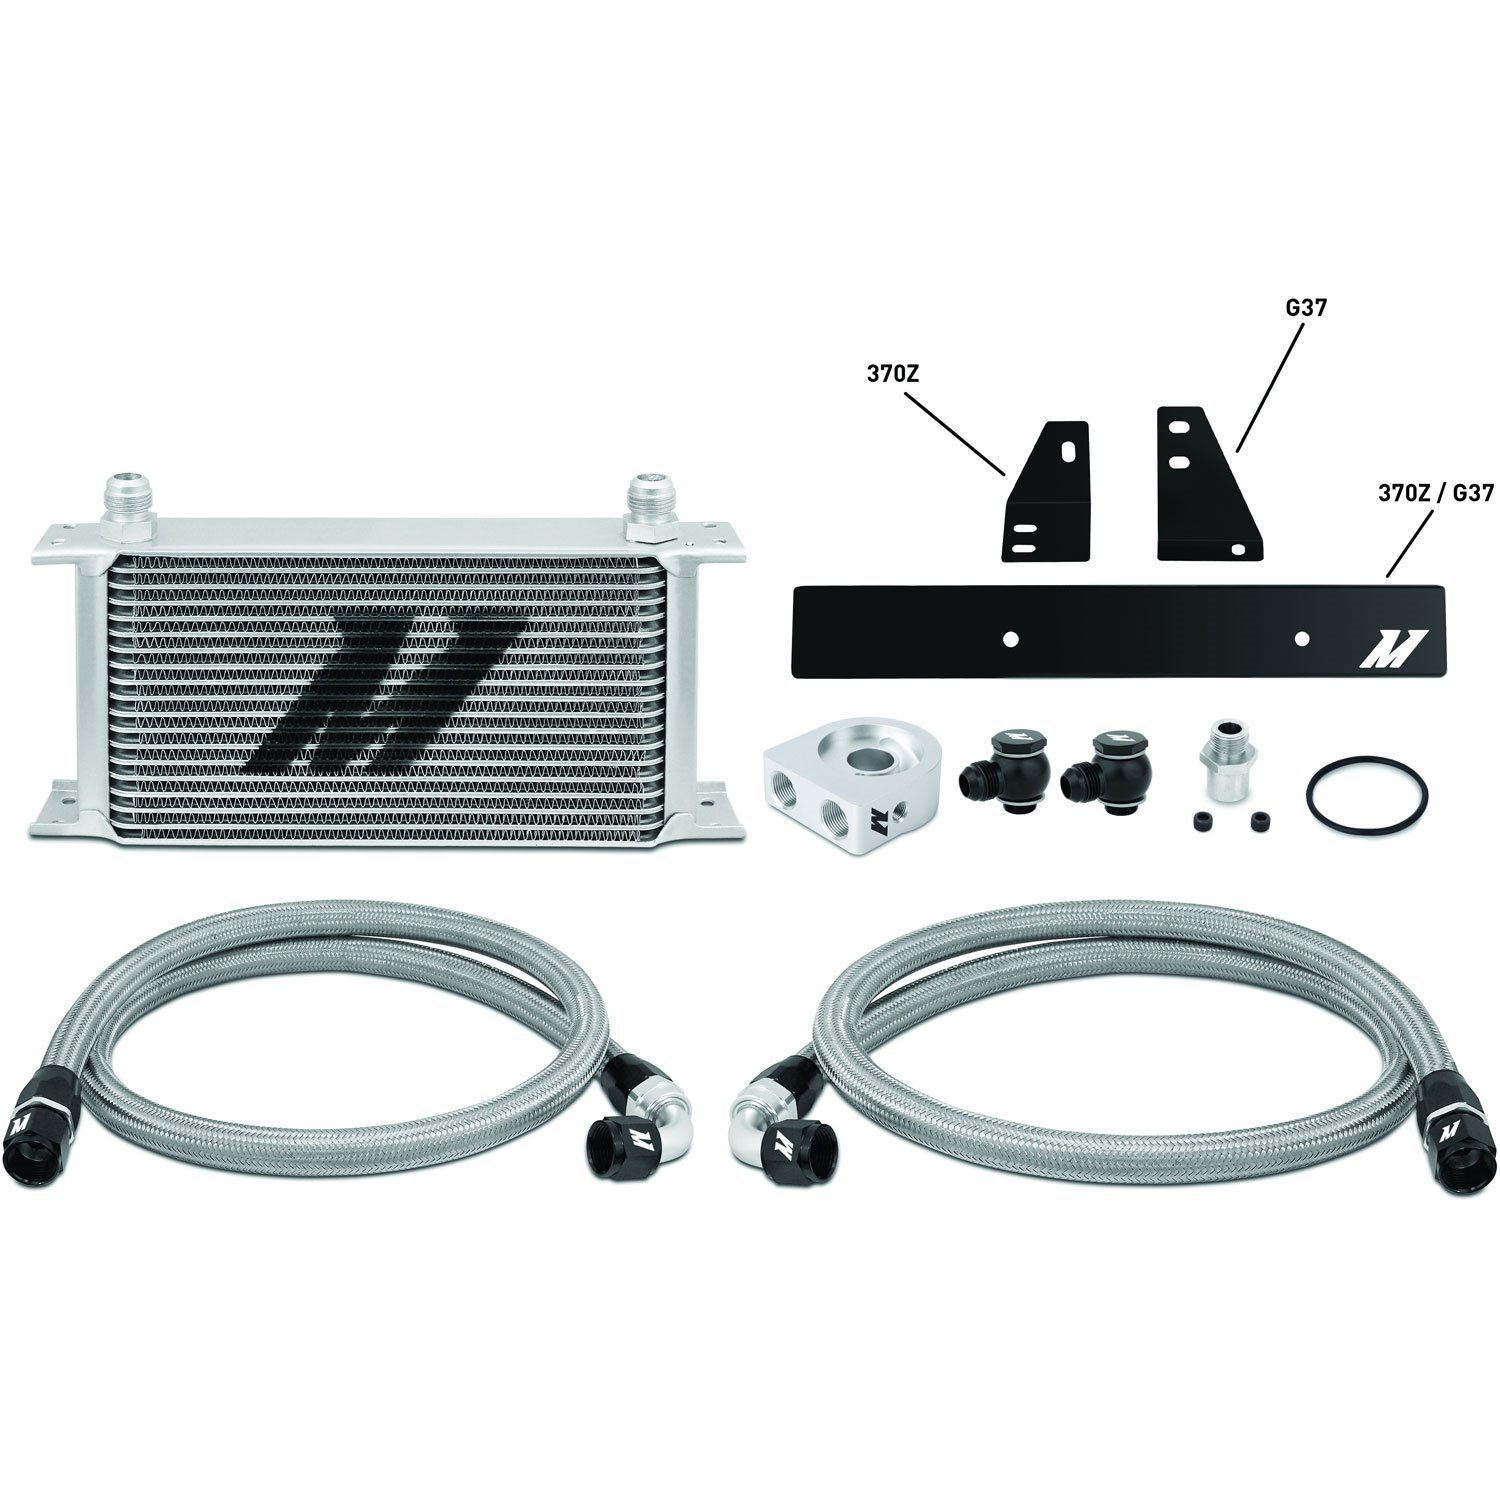 Nissan 370Z/ Infiniti G37 Coupe only Oil Cooler Kit - MFG Part No. MMOC-370Z-09